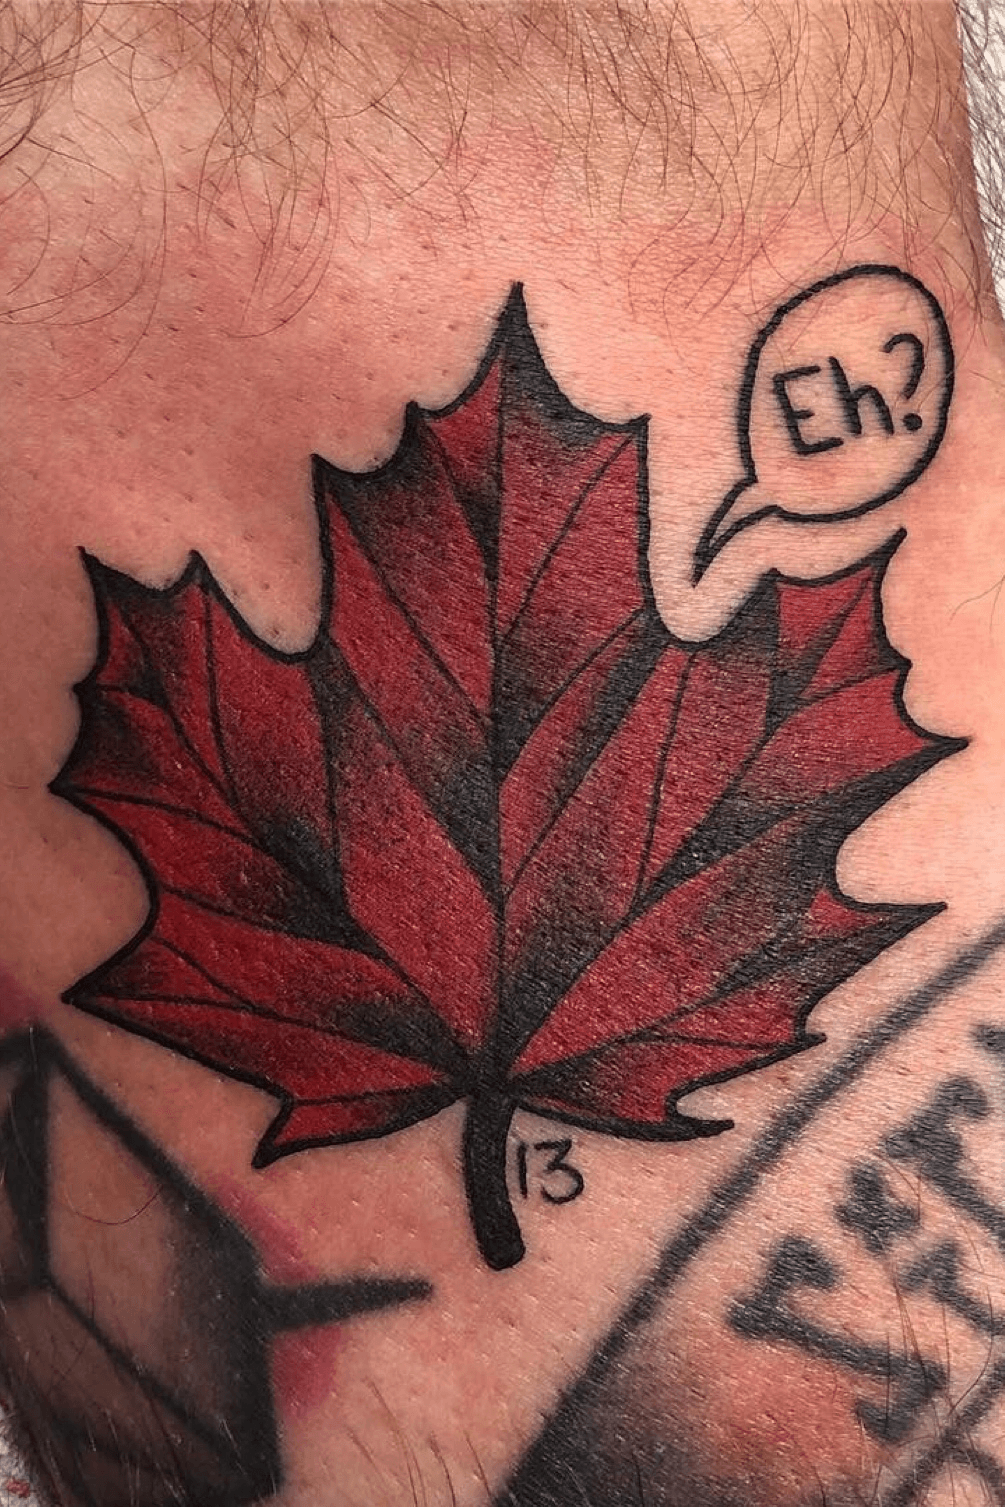 canadian maple leaf outline tattoo